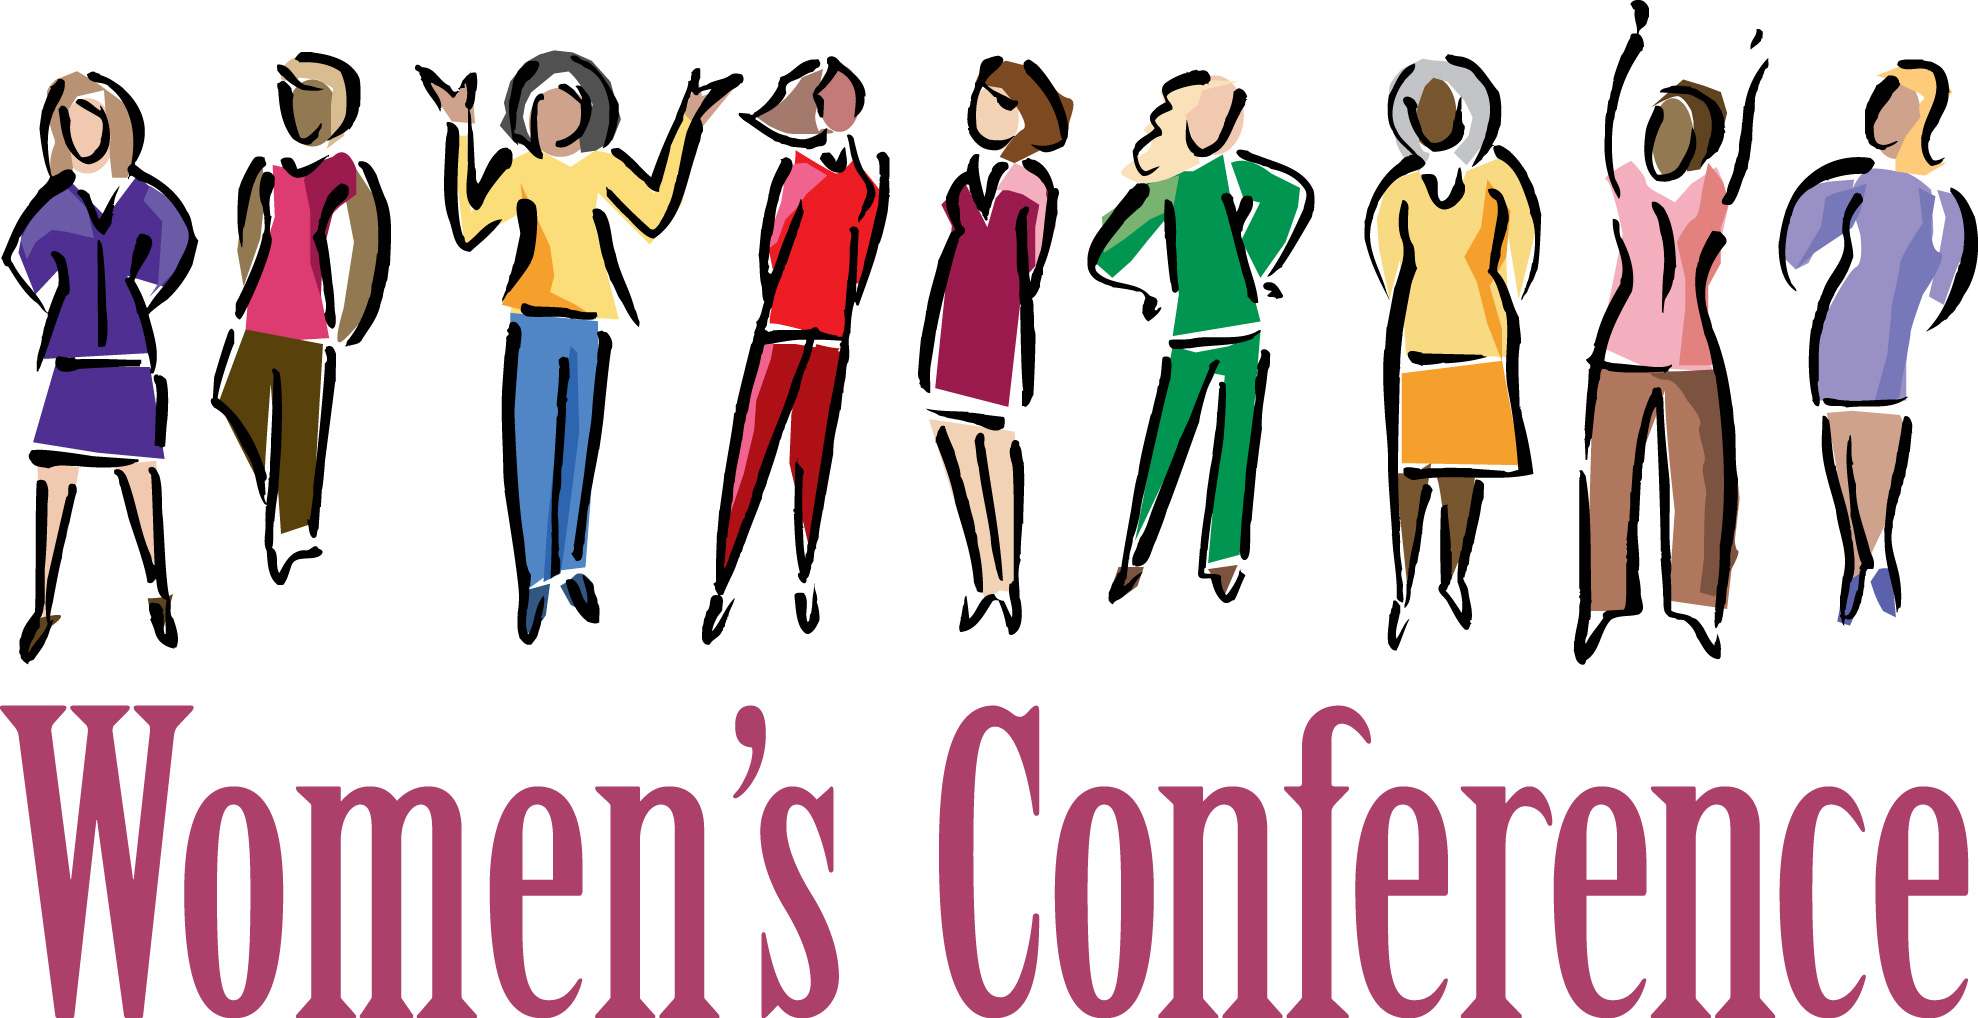 Womens conference clipart